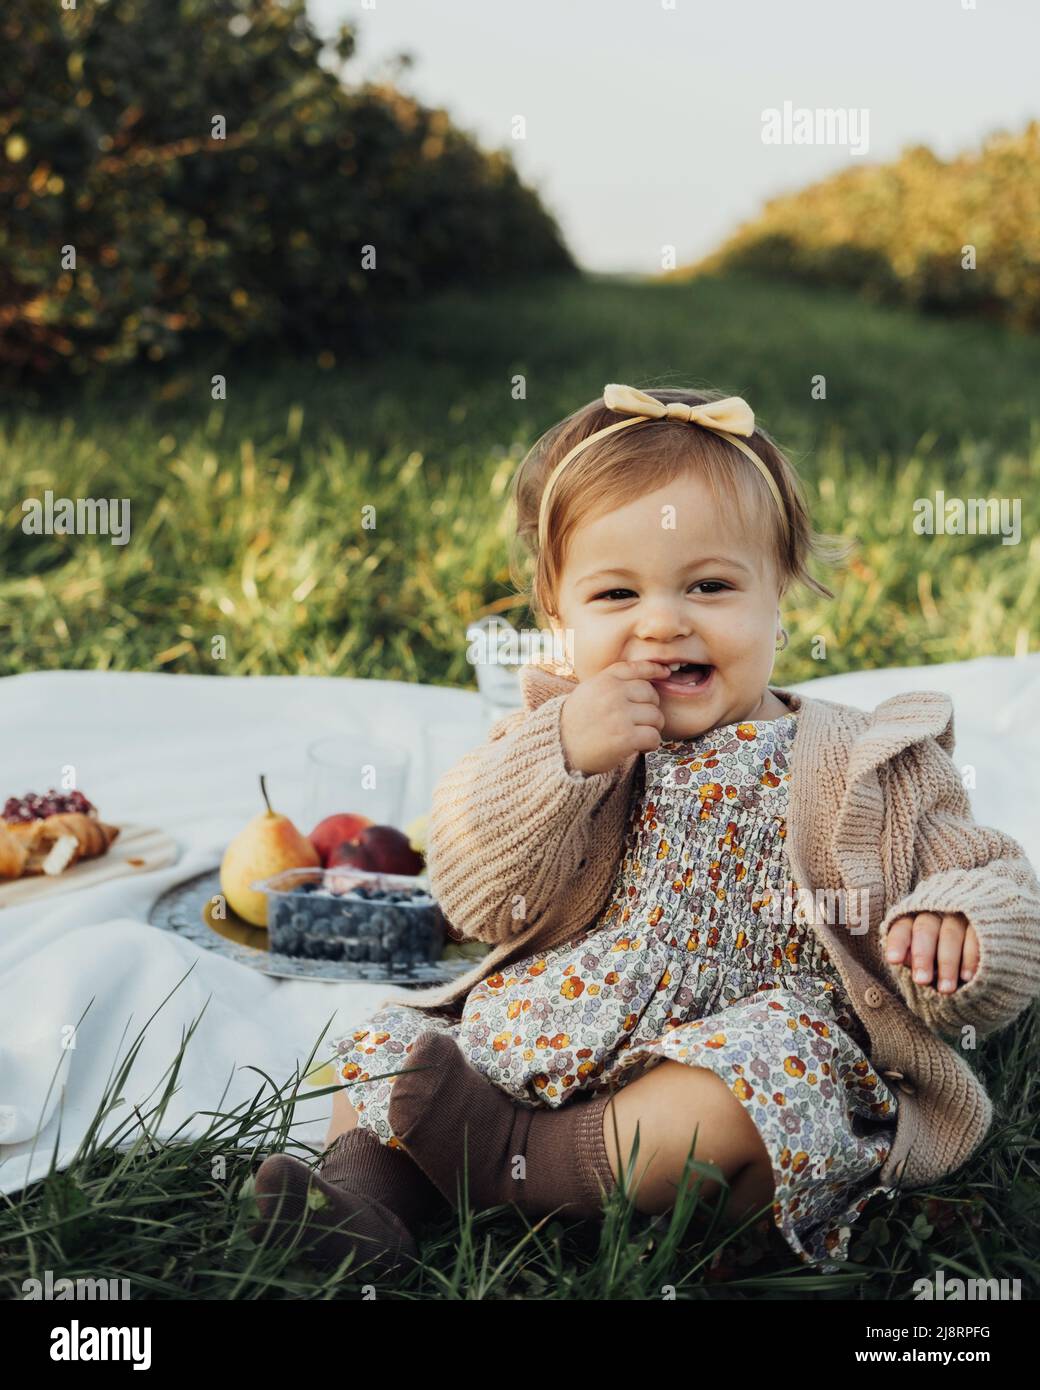 Vertical Portrait of Cheerful Little Baby Girl Sitting on a Plaid on Picnic Outdoors at Sunset Stock Photo